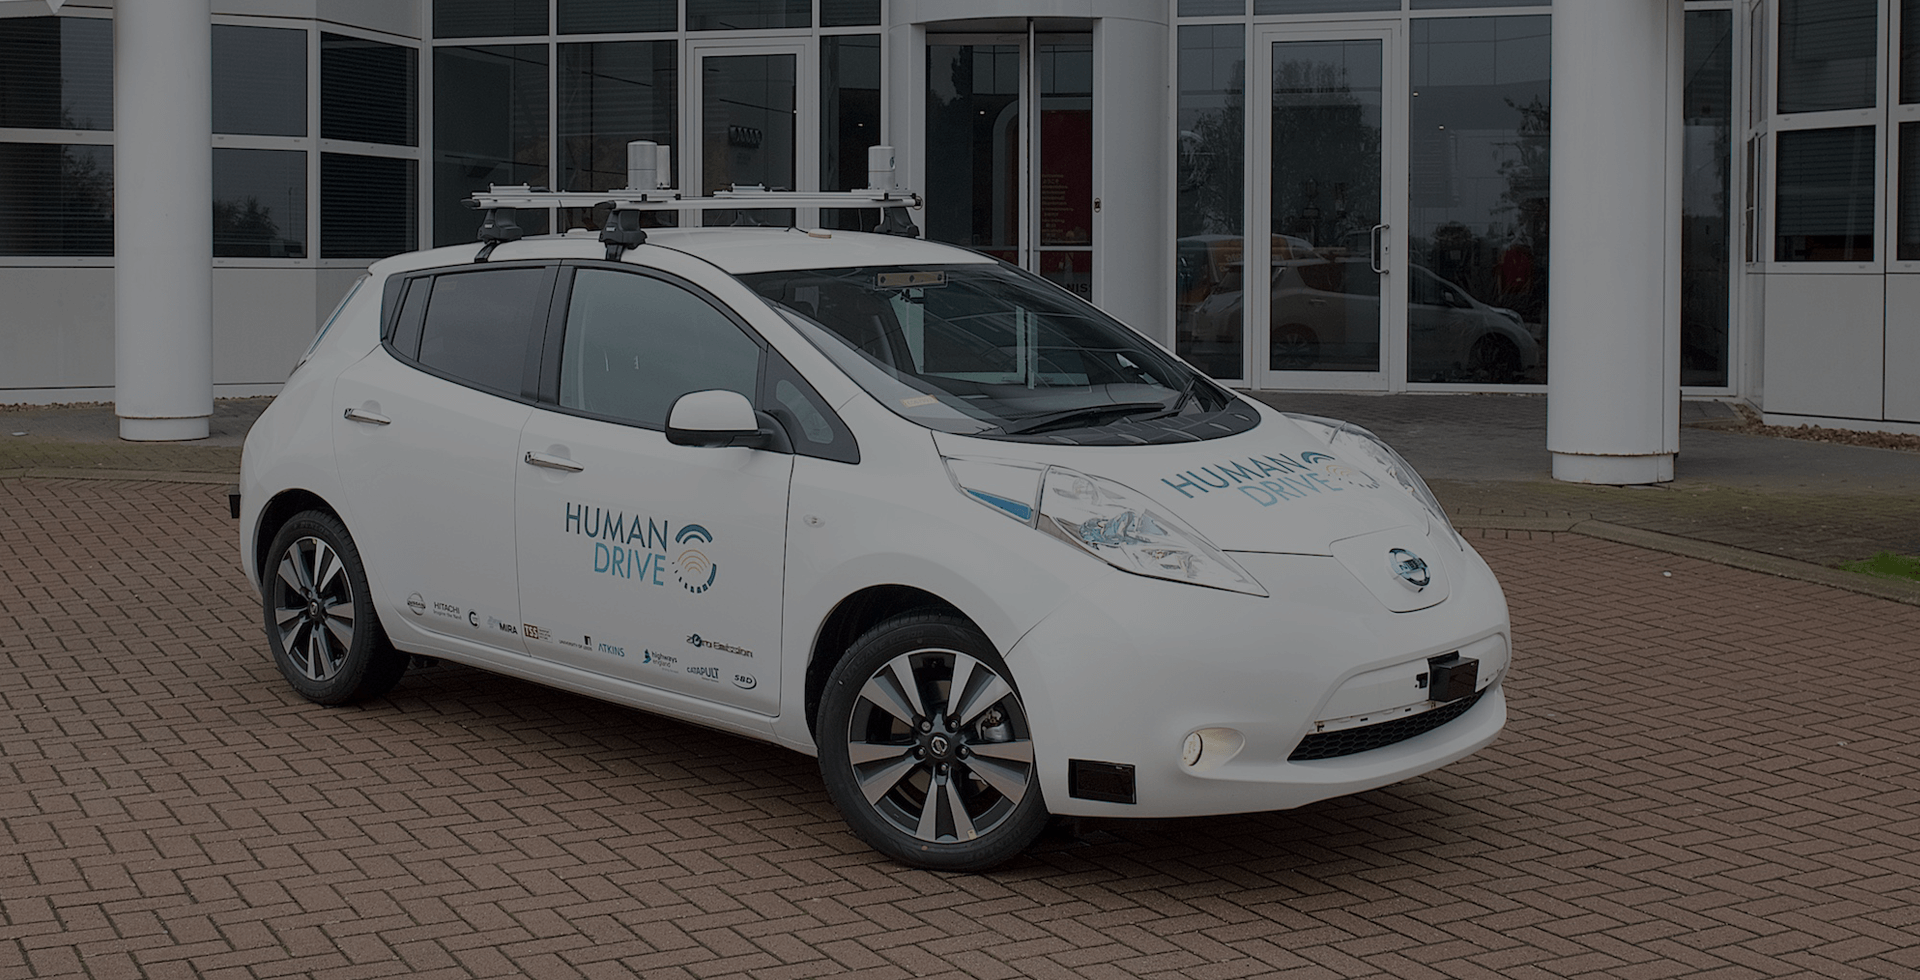 Autonomous Car Project seeks to emulate natural human driving in UK driving environment.